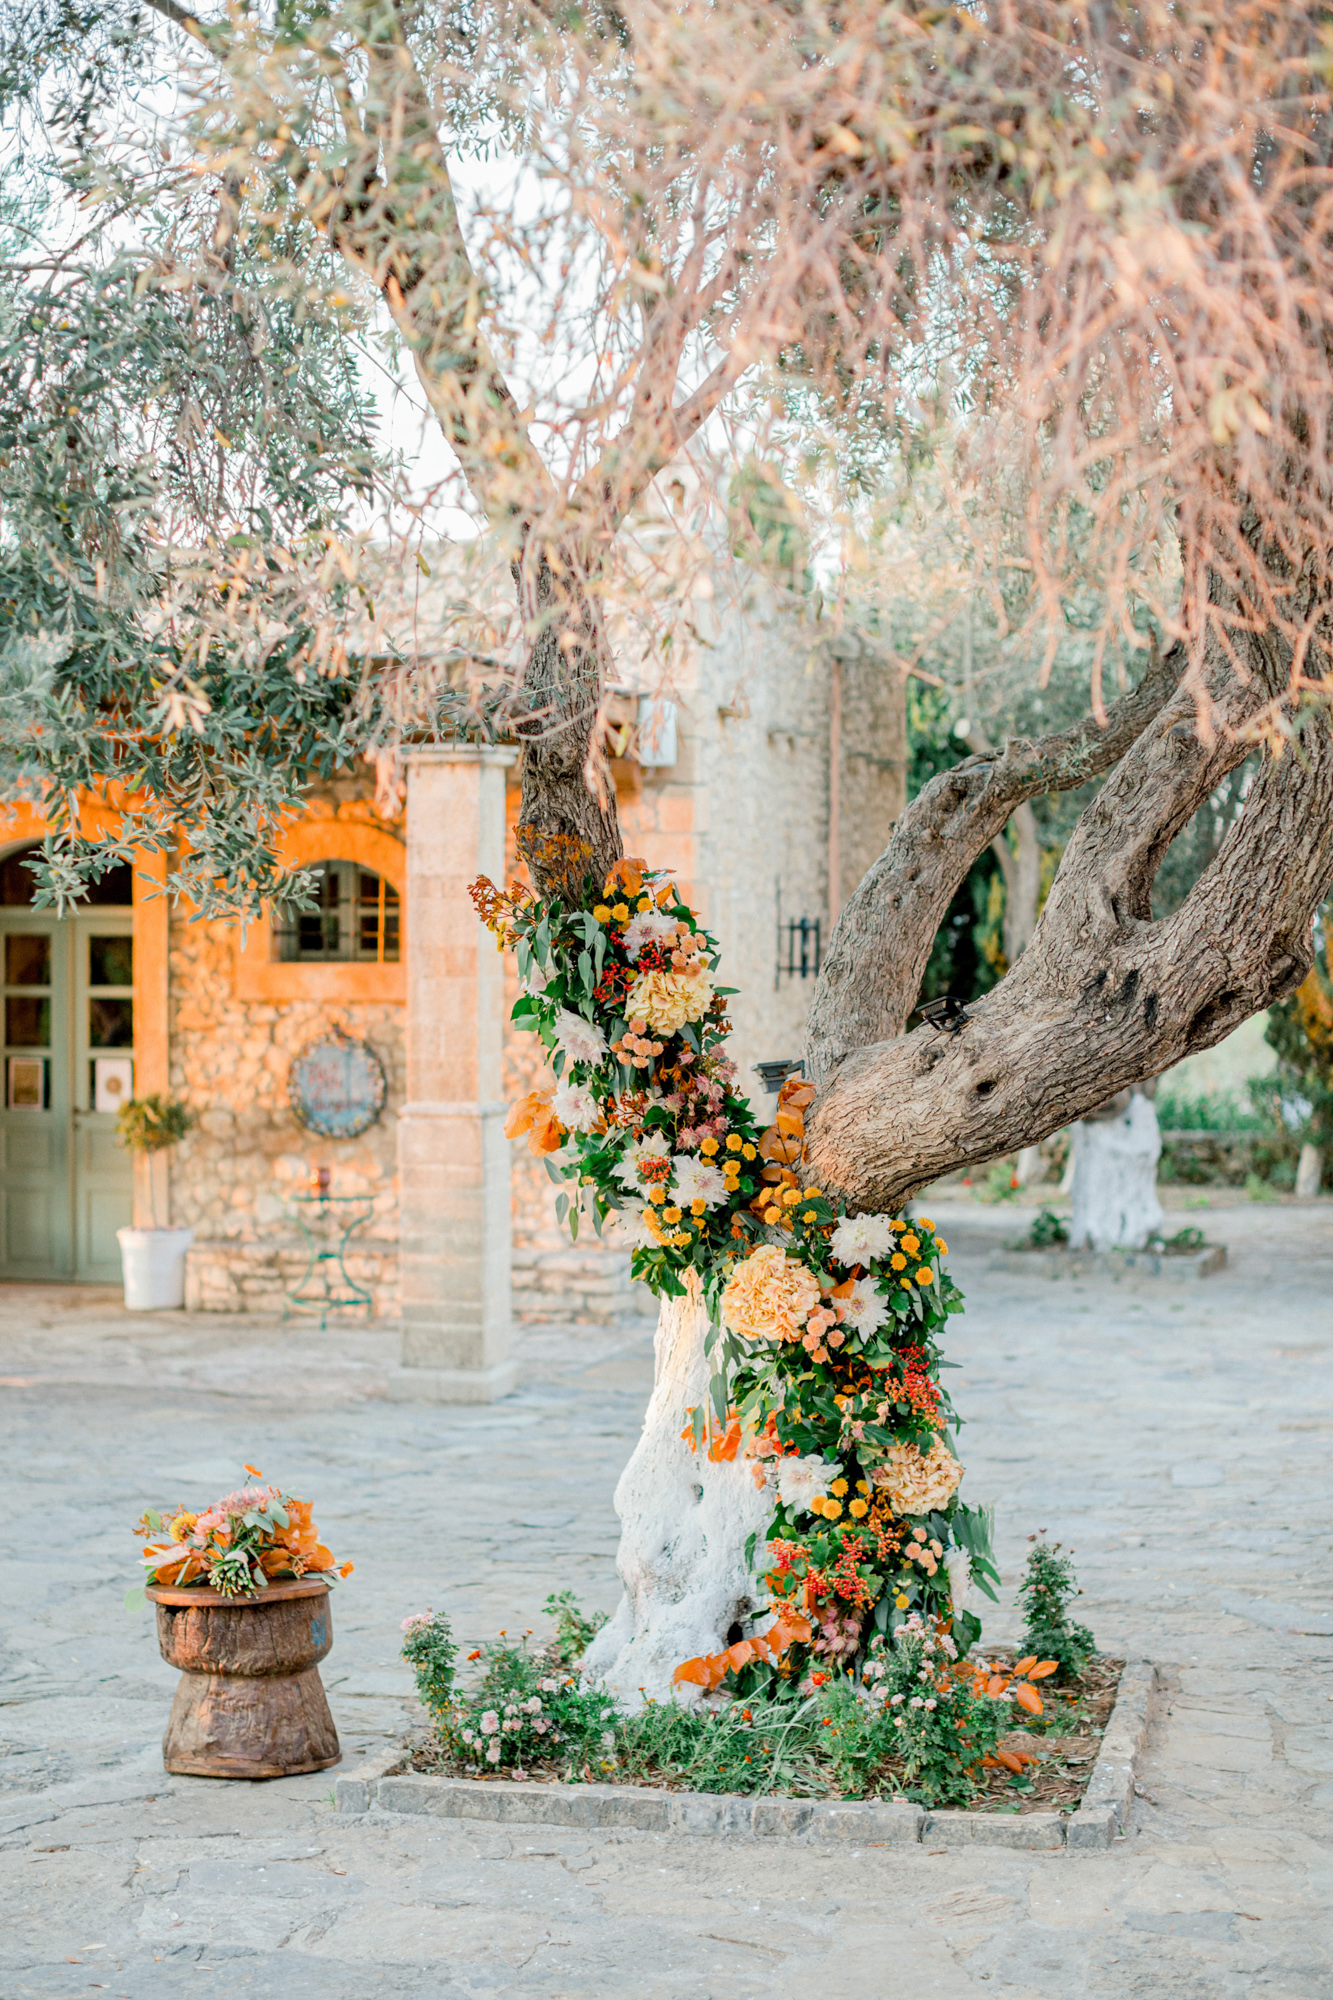 Reception decoration, flowers and details by R&C events and Oneiranthi for a sunset wedding editorial in Grecotel Agreco Farms Crete Greece.